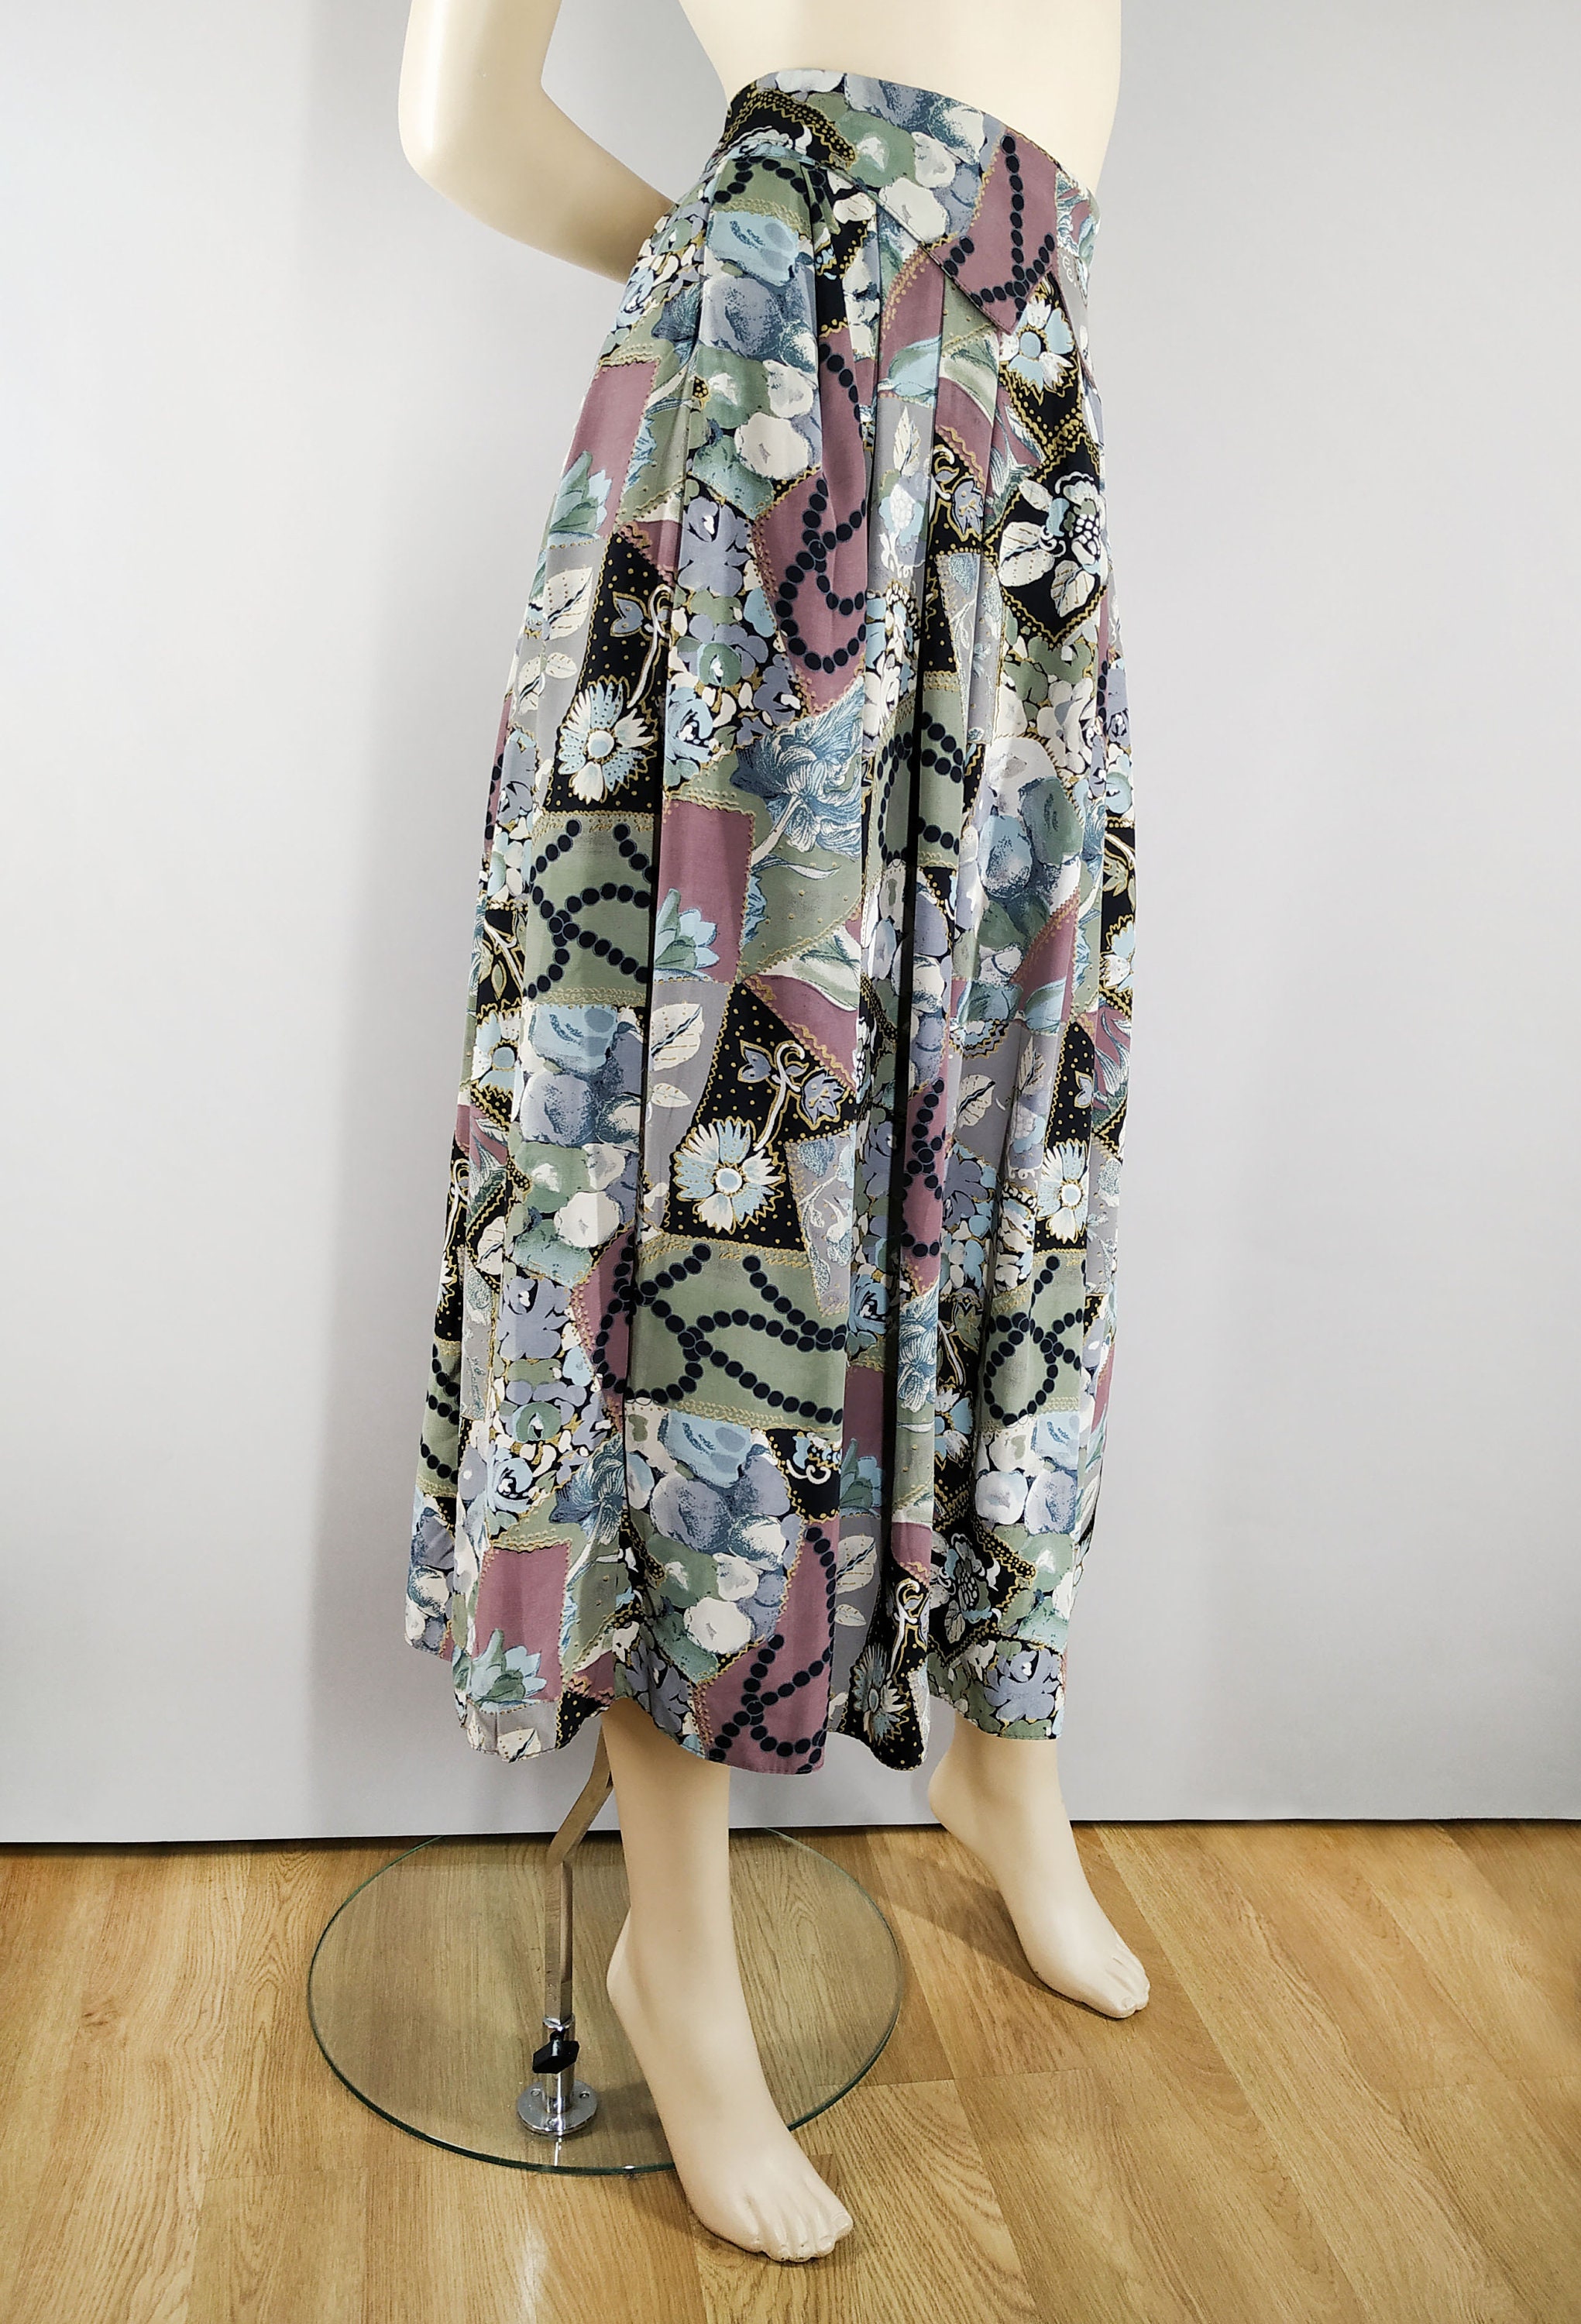 Vintage Midi / Maxi Skirt in Abstract Print With Pockets - Etsy